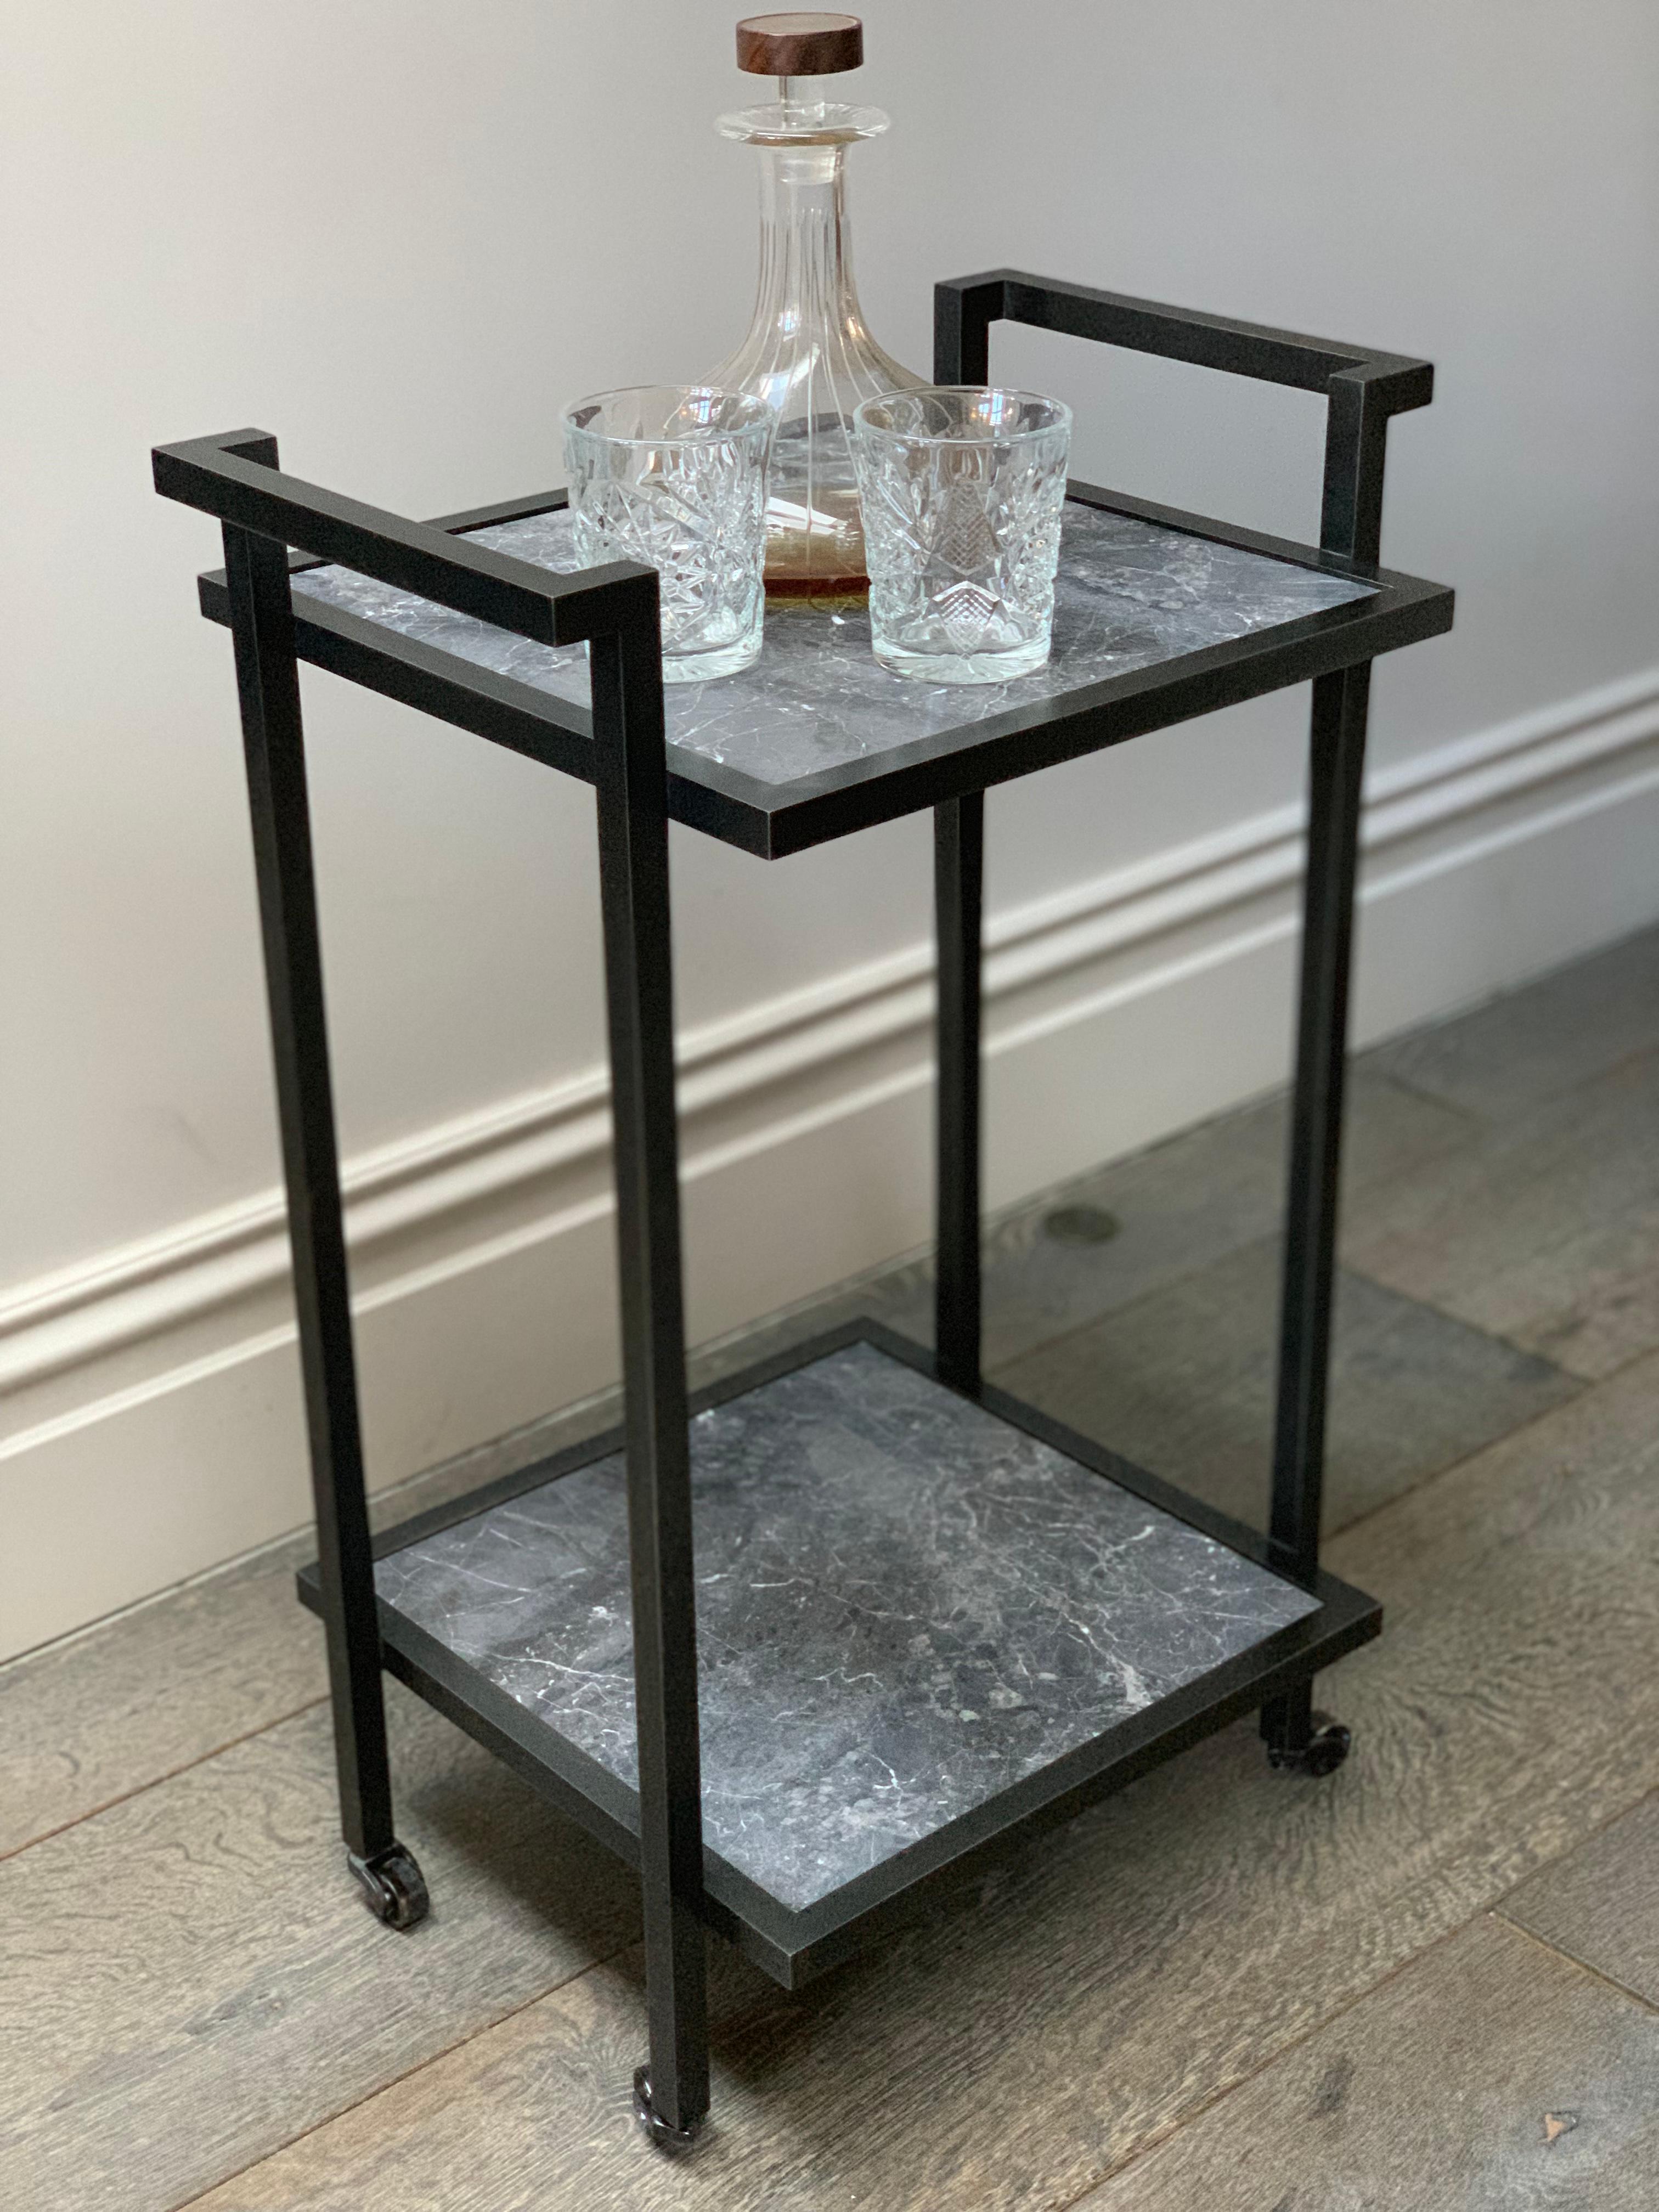 The Bacco Drinks Trolley is not just a functional piece of furniture, it is a statement of style. With its sleek, sculptured design and perfectly proportioned dimensions, this trolley exudes a glamorous and masculine aesthetic that is sure to